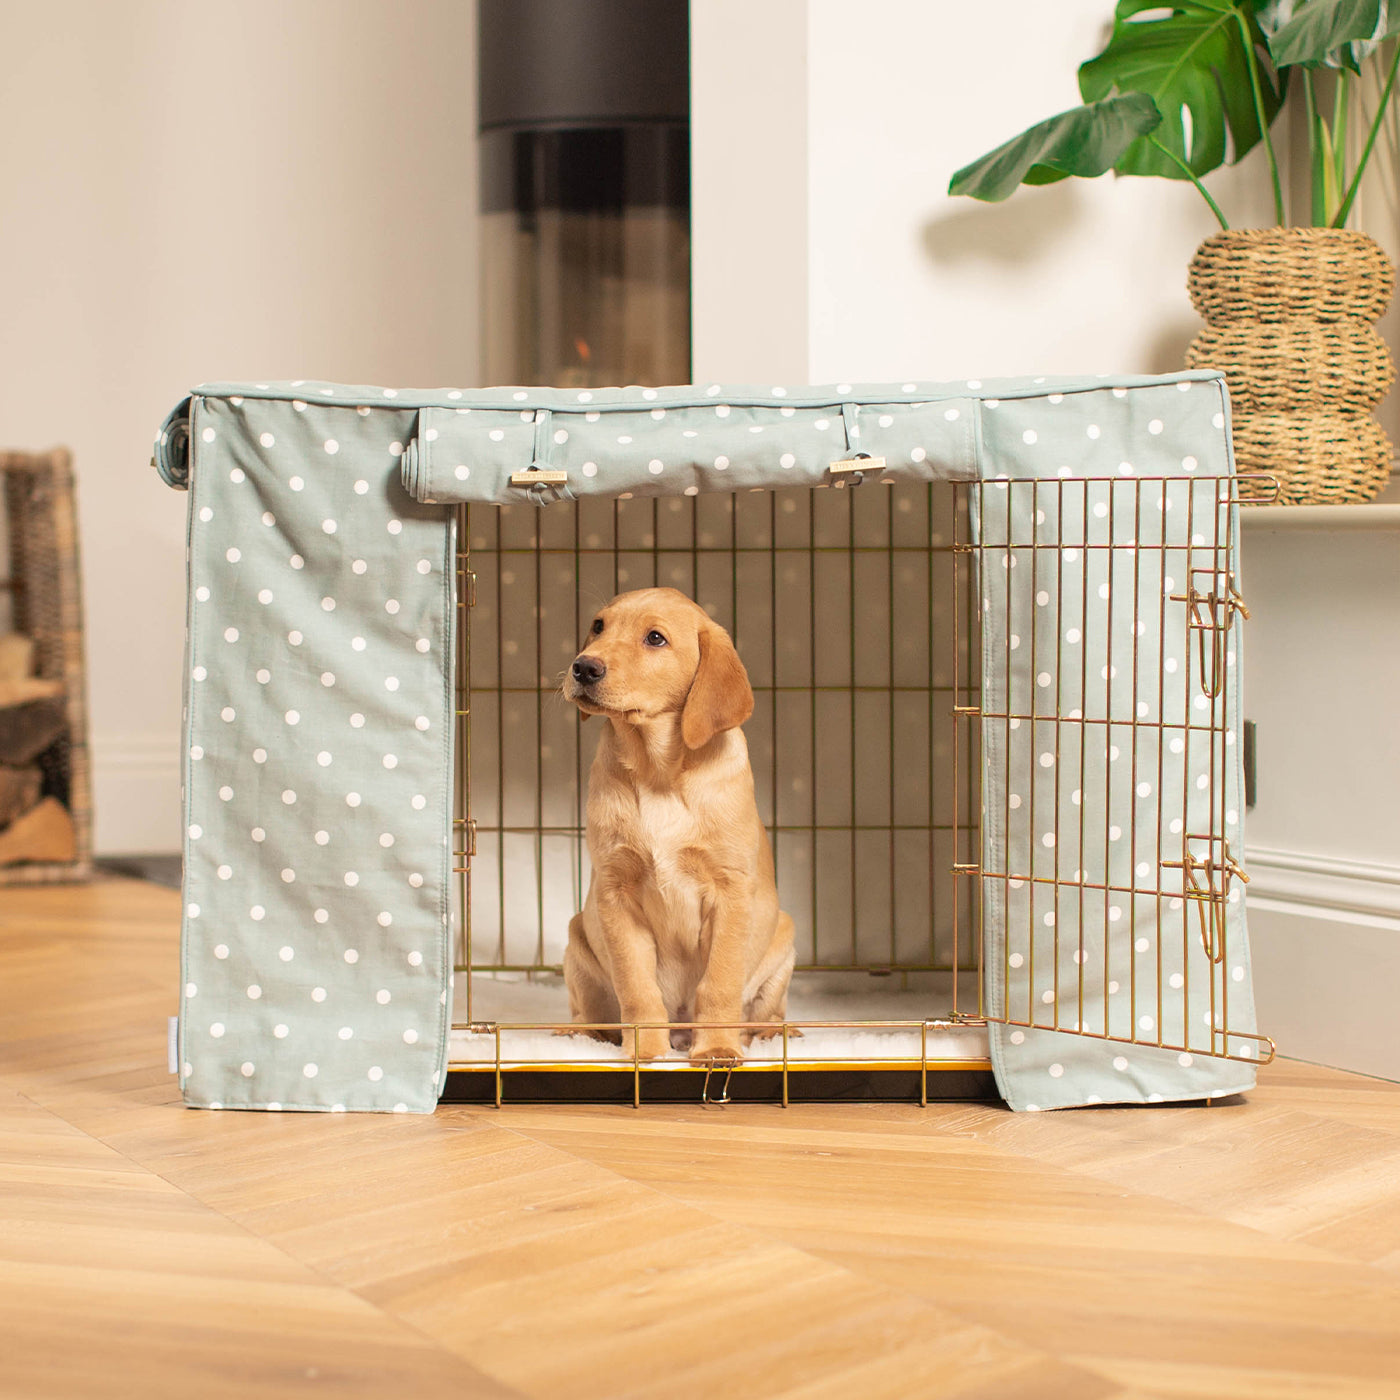 Luxury Gold Dog Cage With Duck Egg Spot Crate Cover, The Perfect Dog Crate For The Ultimate Naptime, Available Now at Lords & Labradors US